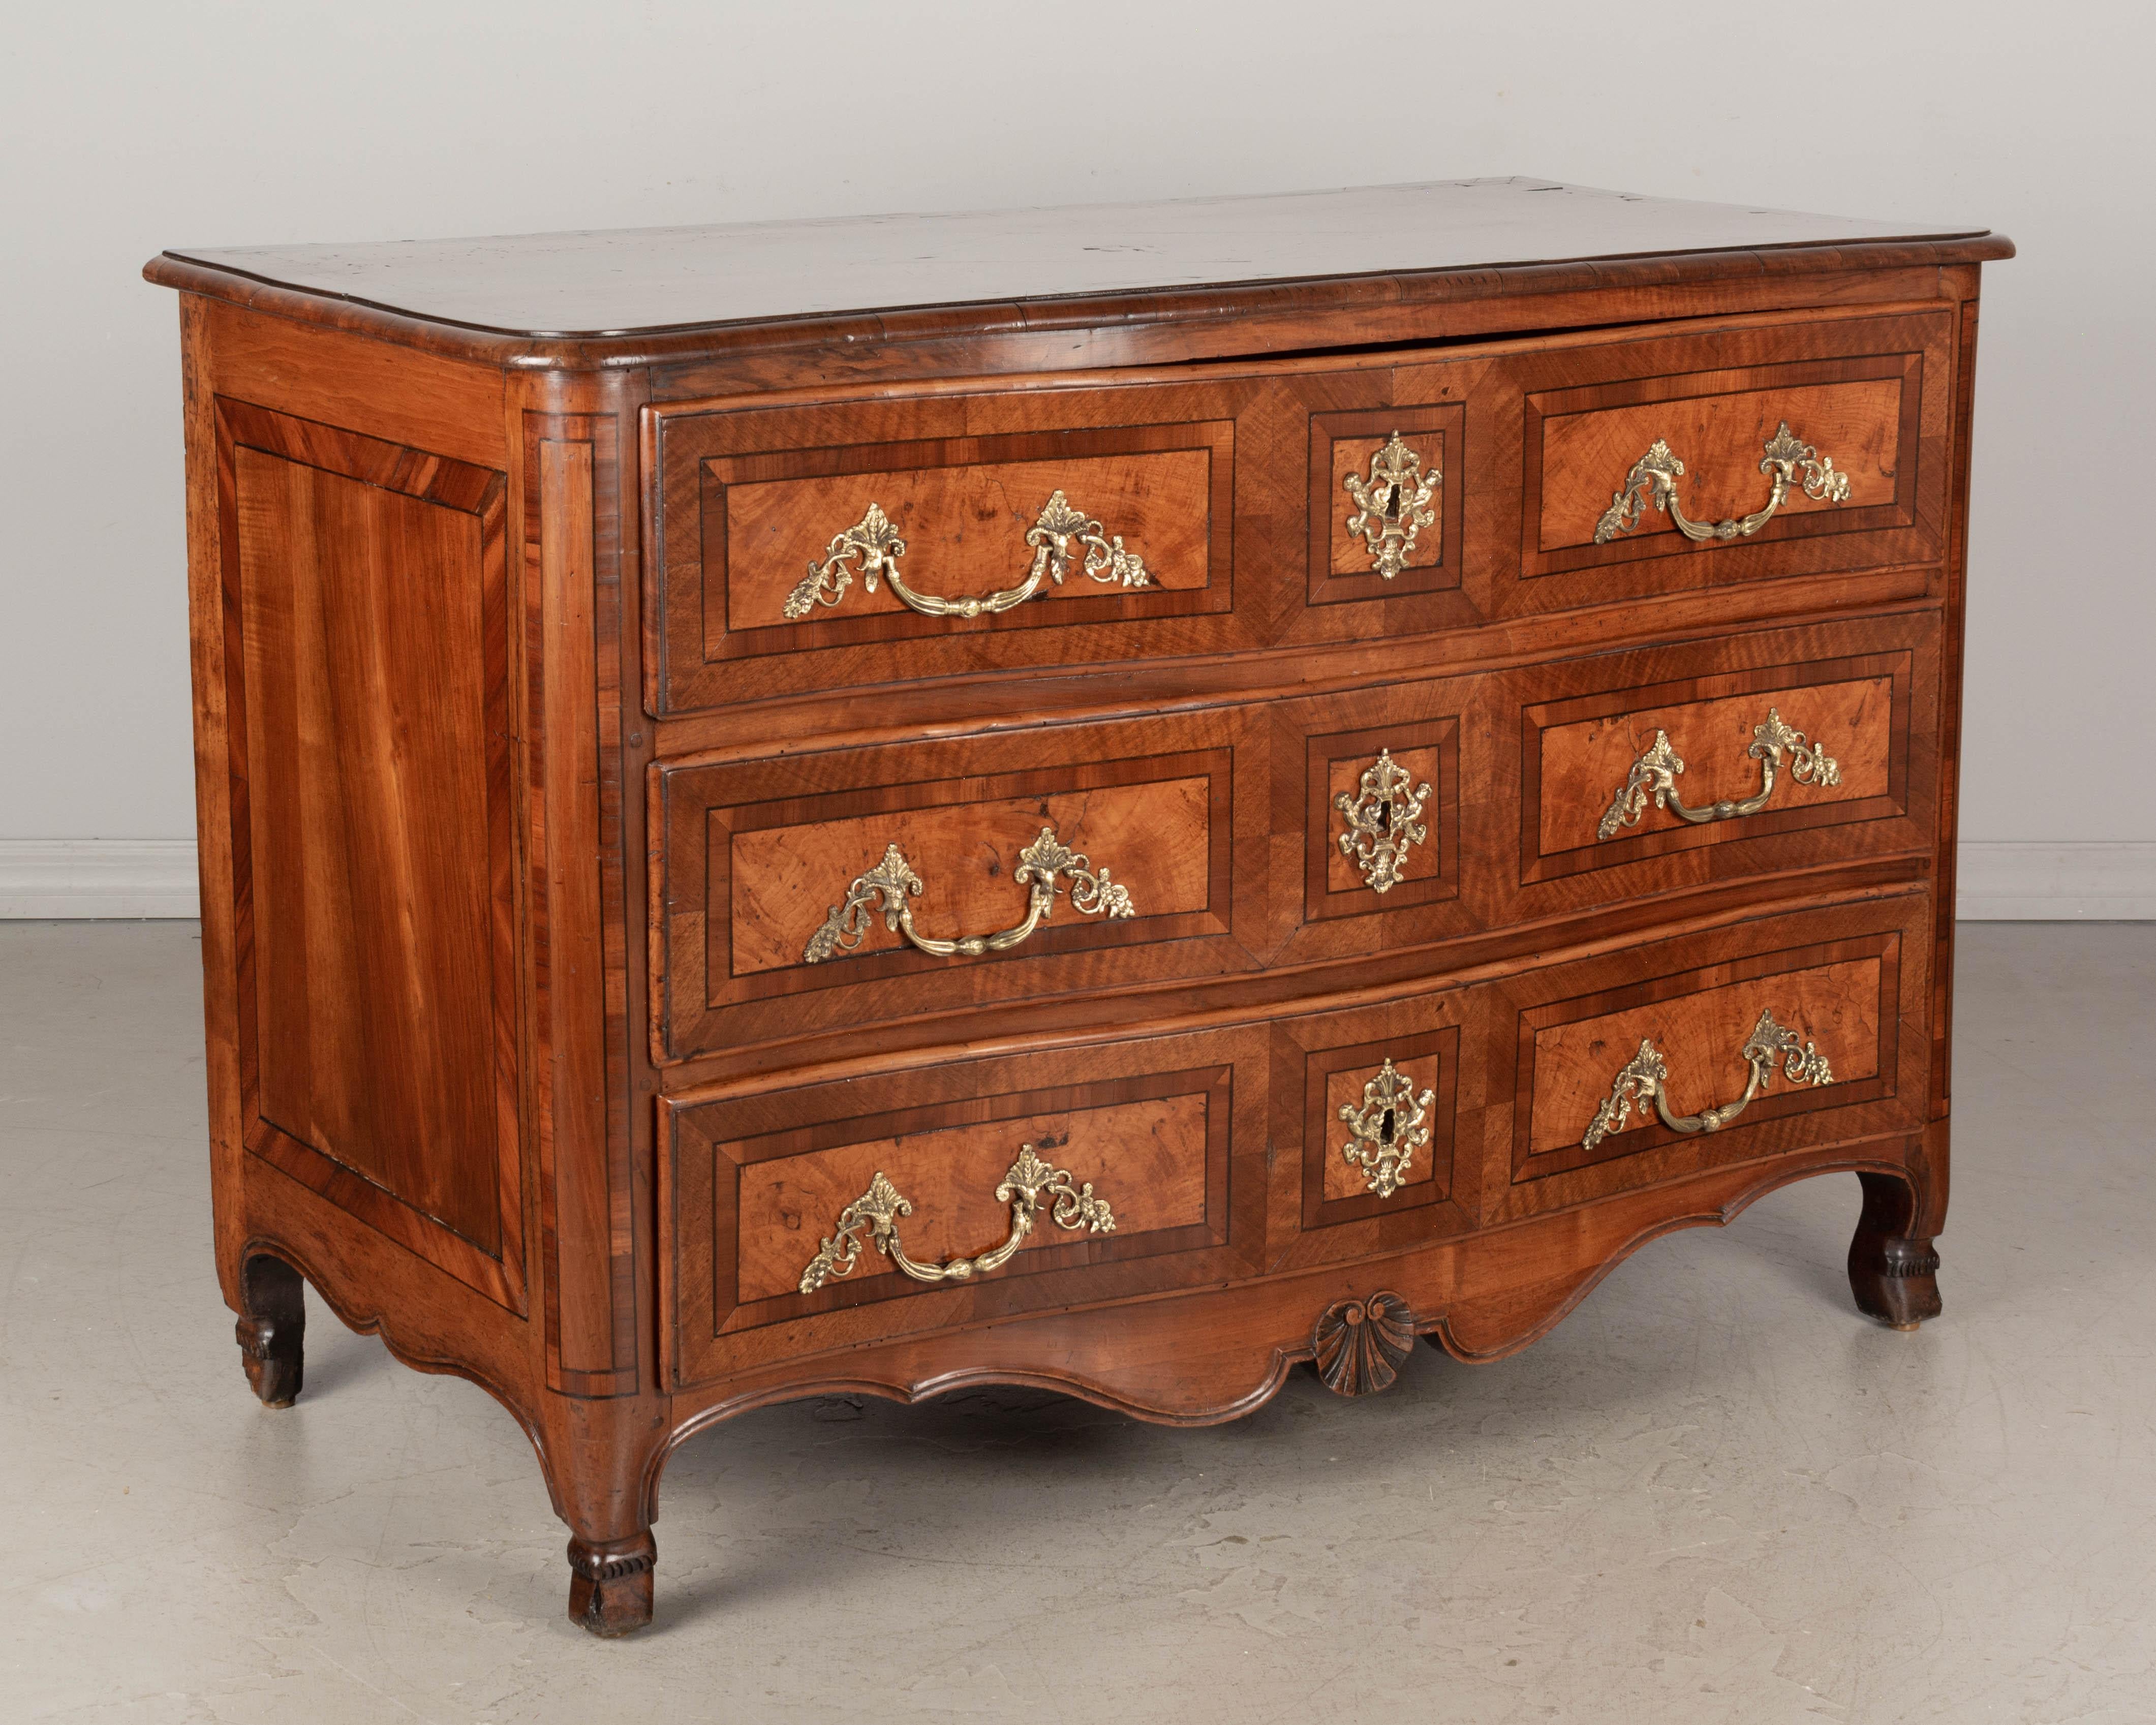 An 18th century French Louis XIV style commode from Grenoble with fine marquetry inlay of cherry, walnut and mahogany. Three dovetailed drawers with slightly serpentine front. Top has rounded front corners and a rosebud inlaid in the center.